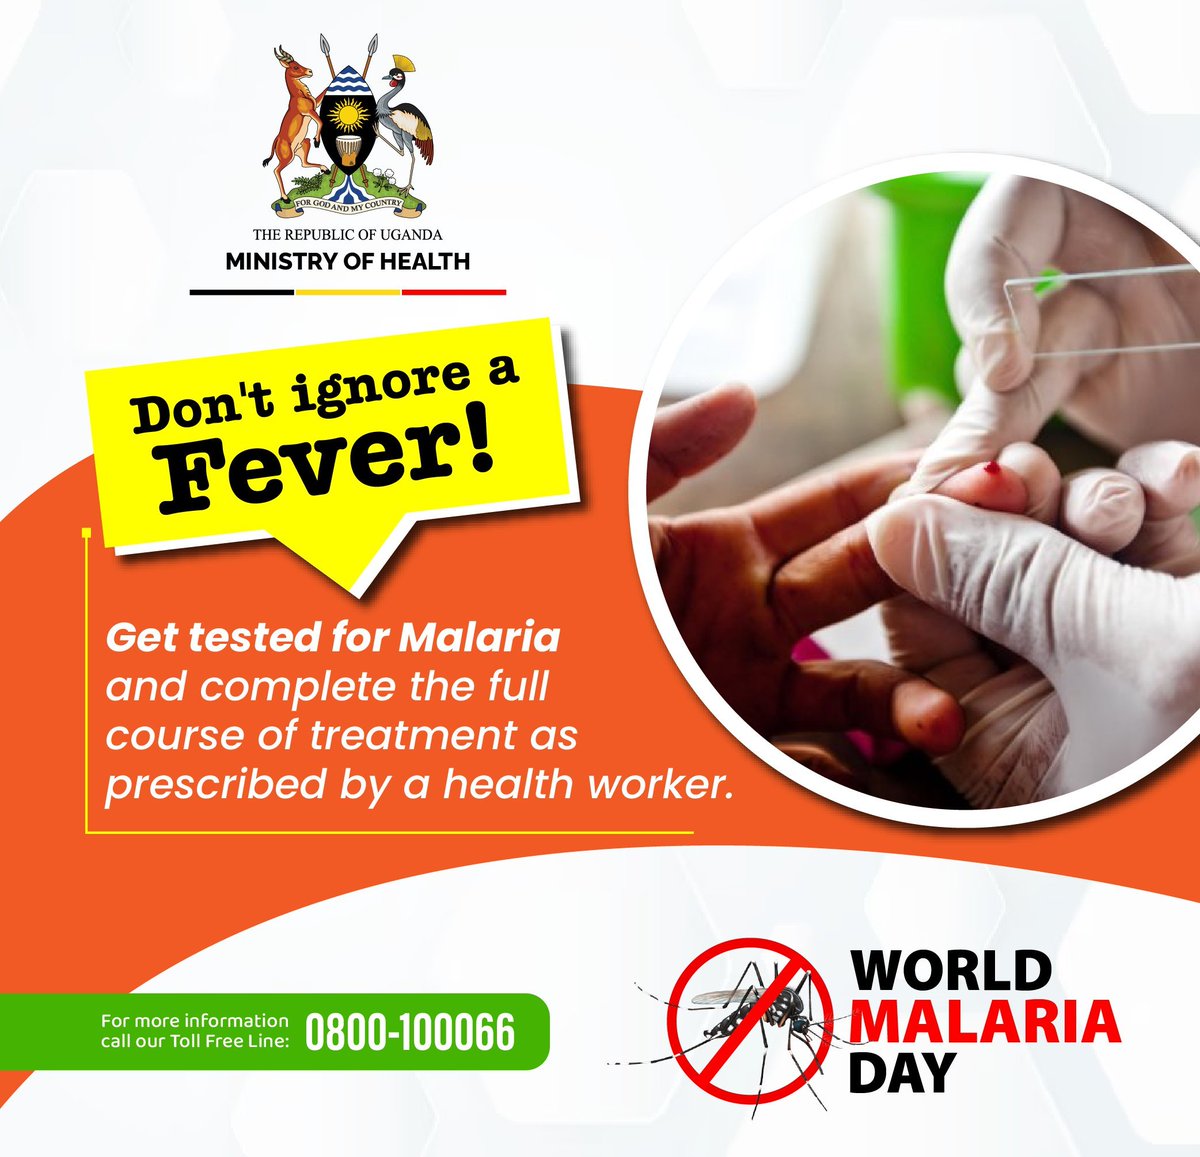 Do NOT ignore a fever. 
Go to the nearest health facility and get tested for #Malaria immediately and follow your health worker's guidance. #WorldMalariaDay24 #MalariaFreeUG 
@MinofHealthUG